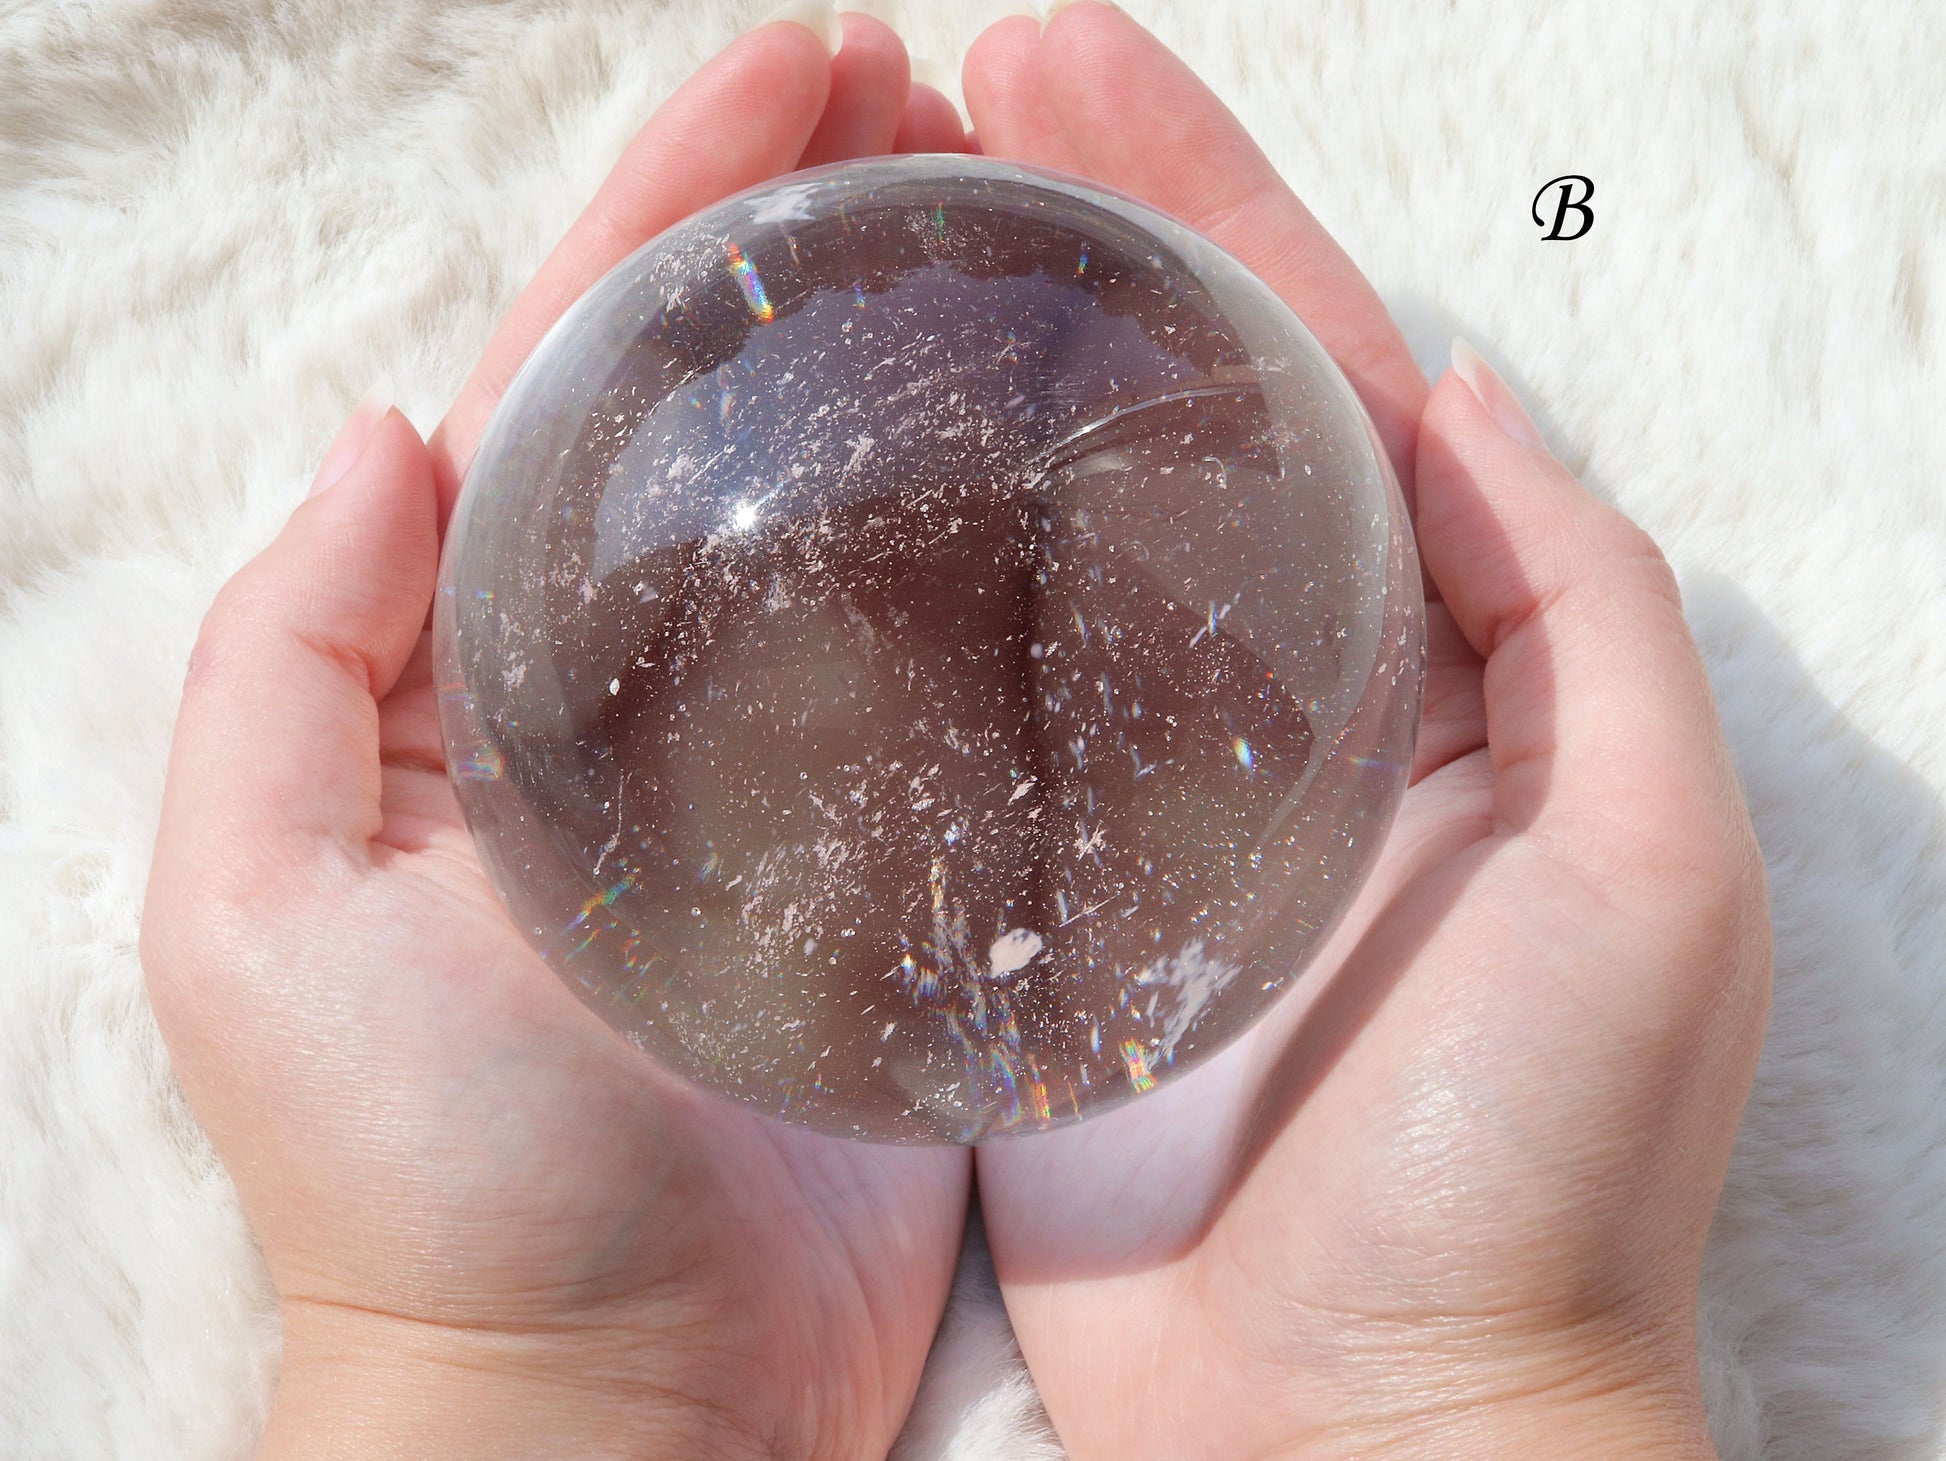 Smelted Quartz Spheres, Ethically Sourced Crystals, Healing and Intuition - PICK YOUR OWN